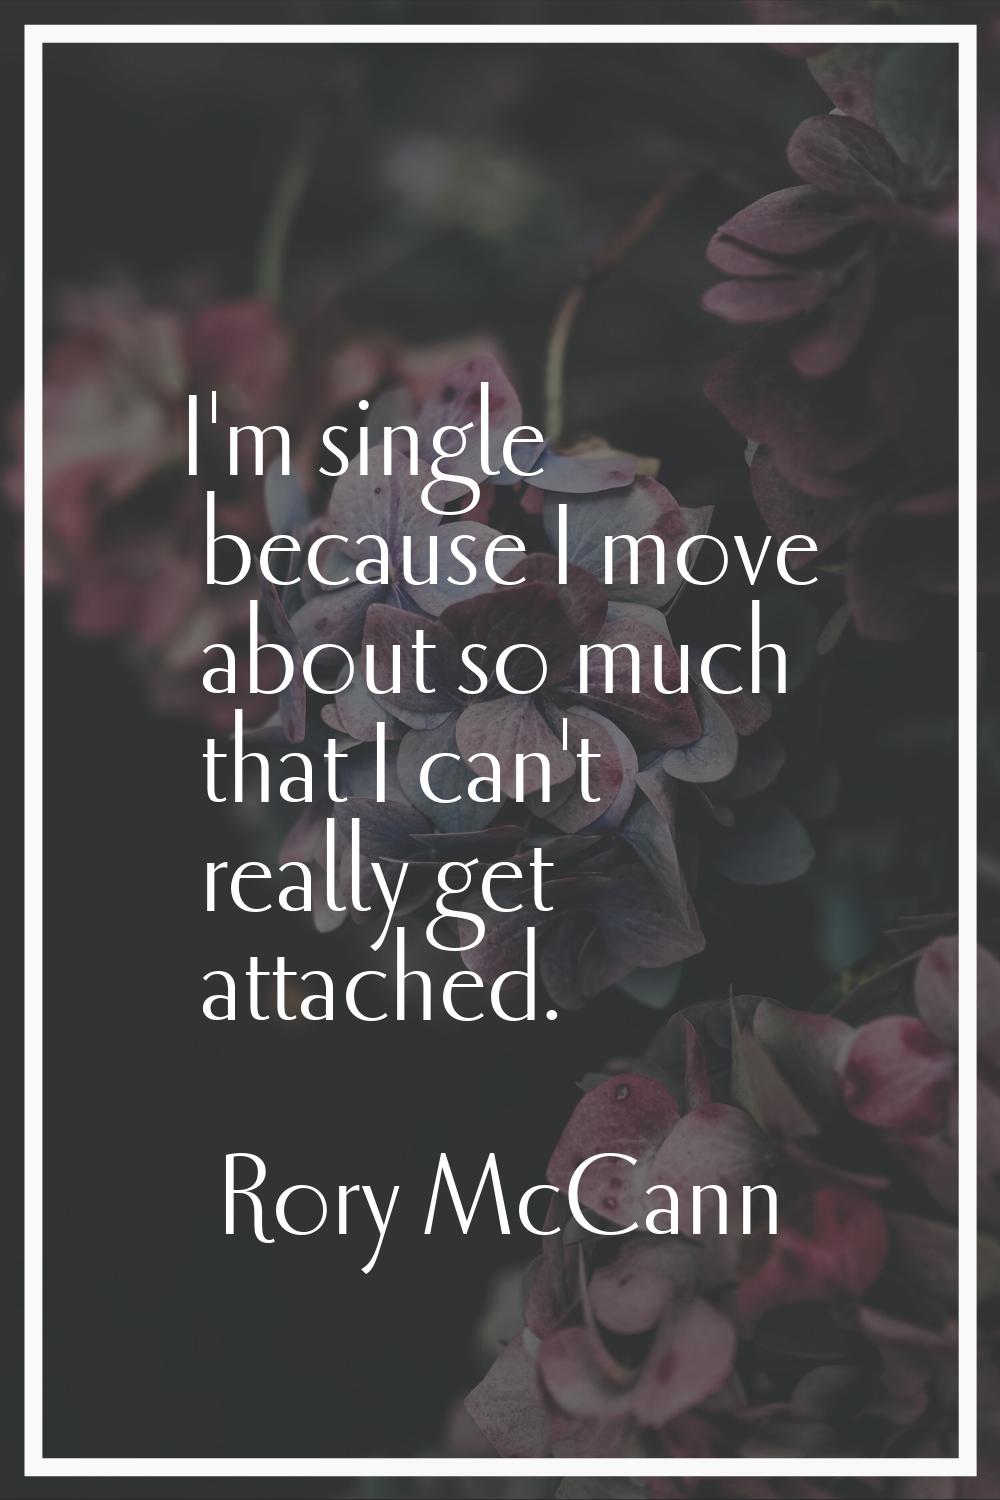 I'm single because I move about so much that I can't really get attached.